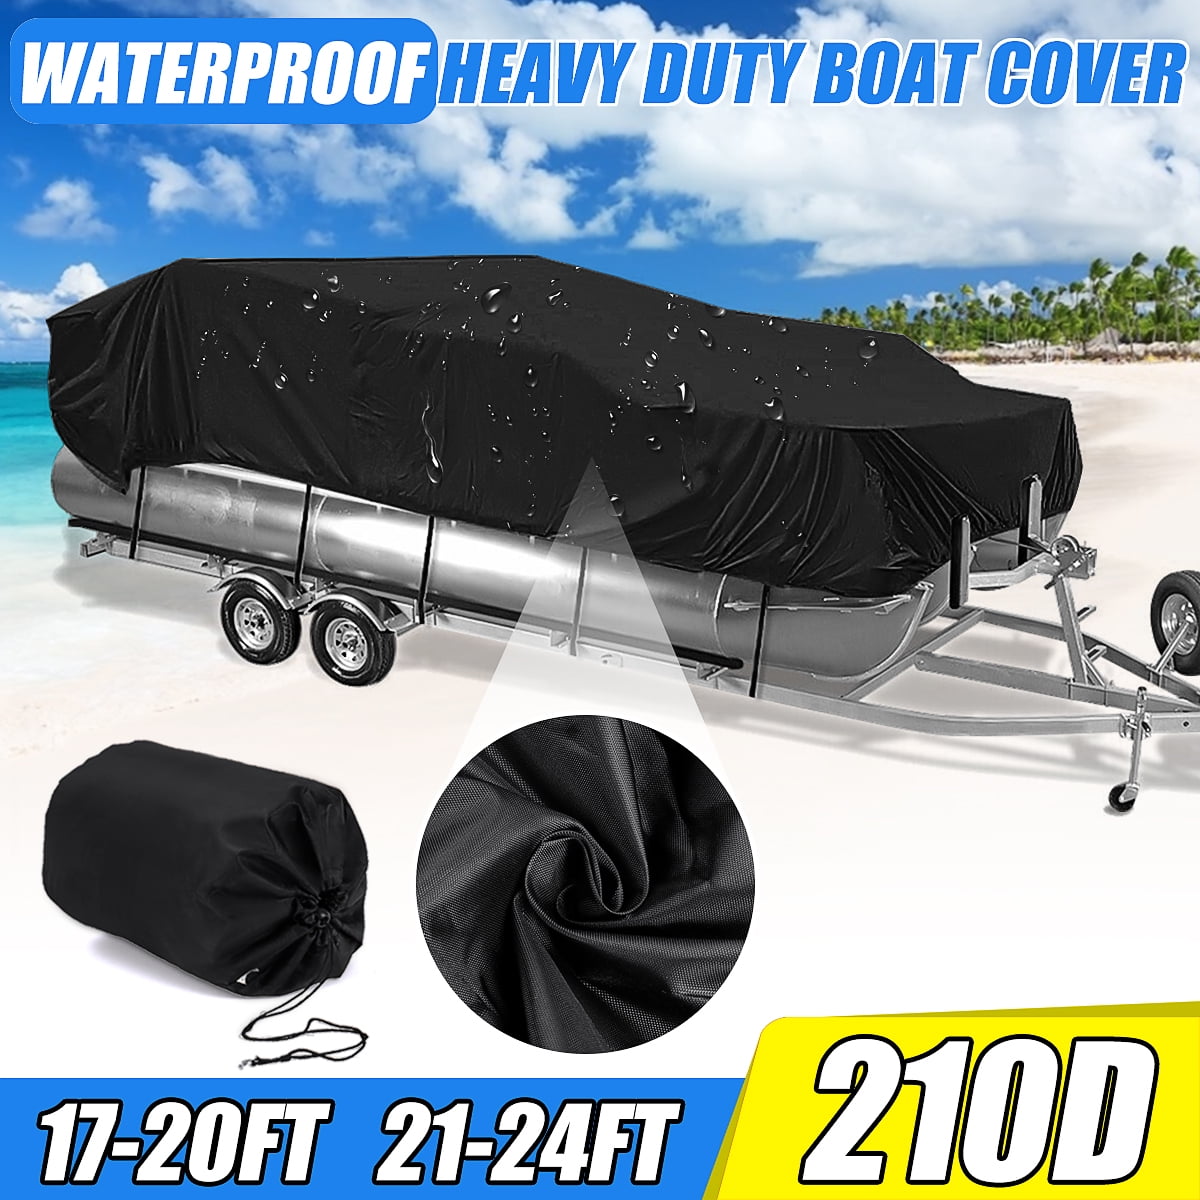 Fits 17 to 28ft Long & Beam Width up to 102in Pontoon Boat Cover with Storage Bag Grey Heavy-Duty Waterproof Stormproof 25 to 28ft Fade-Resistant Polyester iCOVER Trailerable Pontoon Boat Cover 